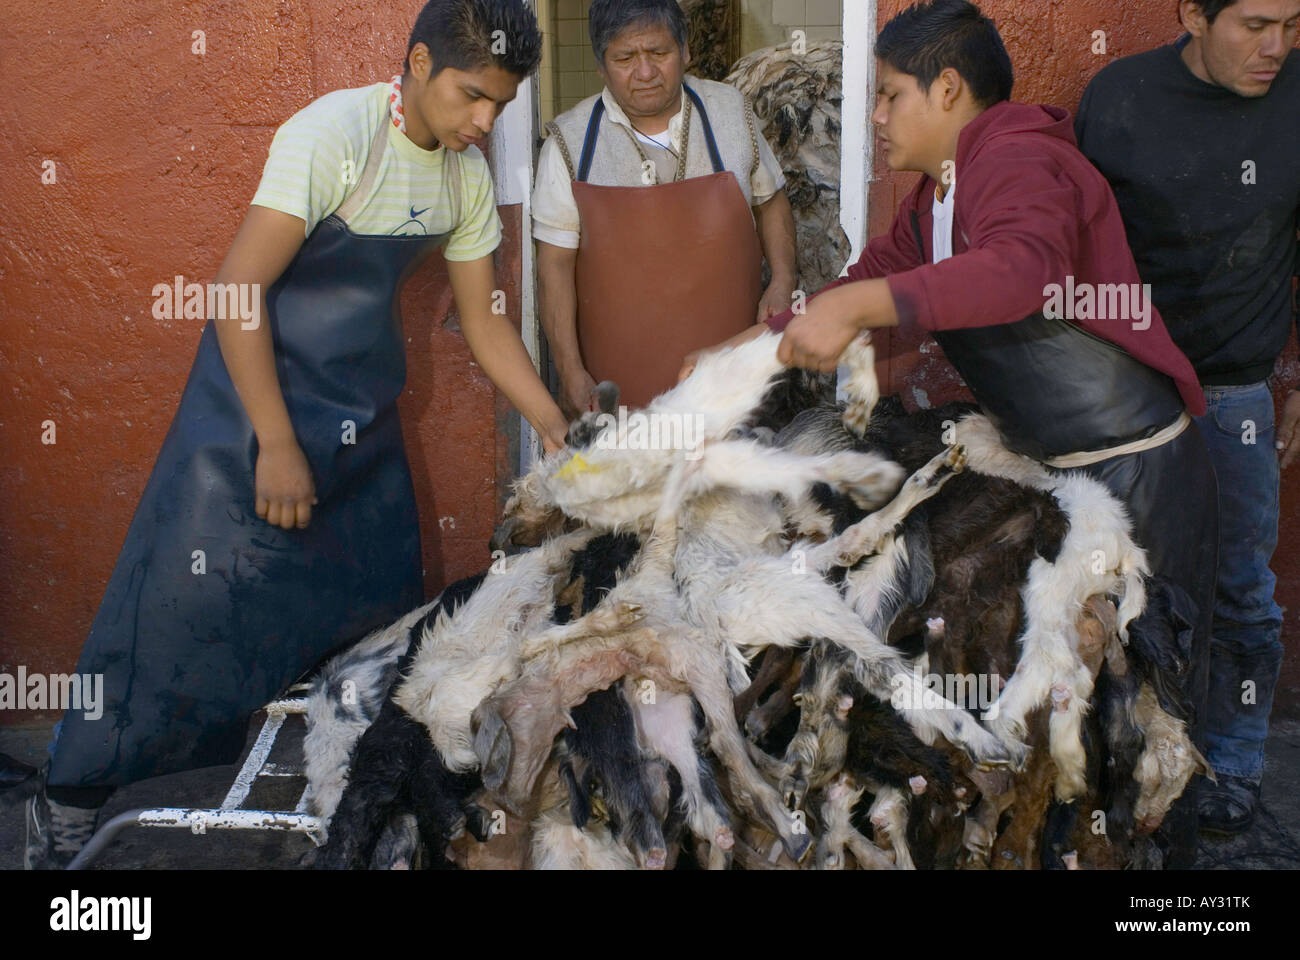 Baby goat cabrito being loaded on to carts from a refrigerated storage area at the San Juan market in Mexico City center. Stock Photo